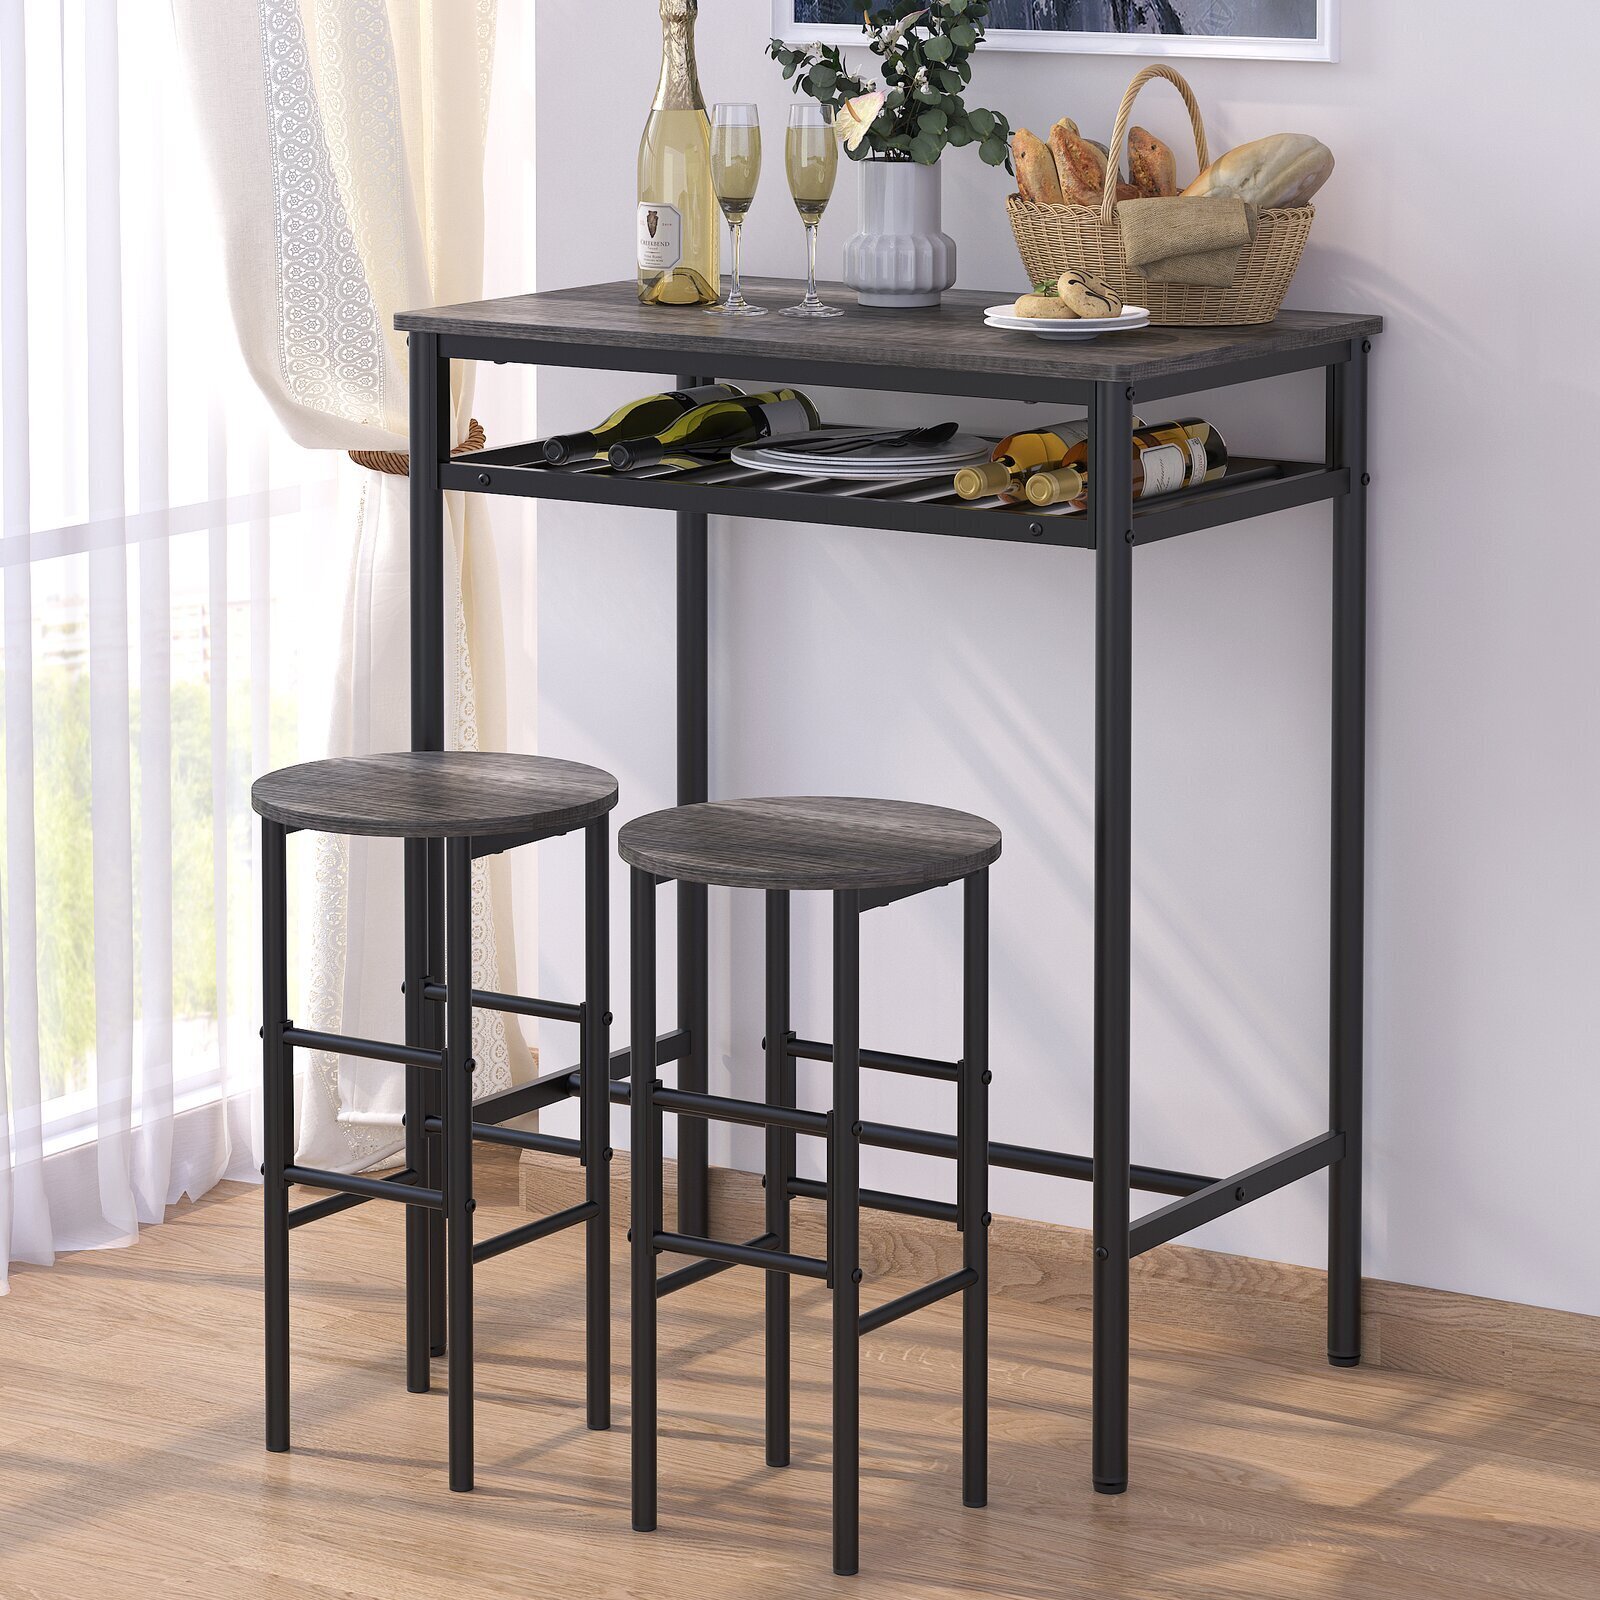 Space saving bar height table with storage